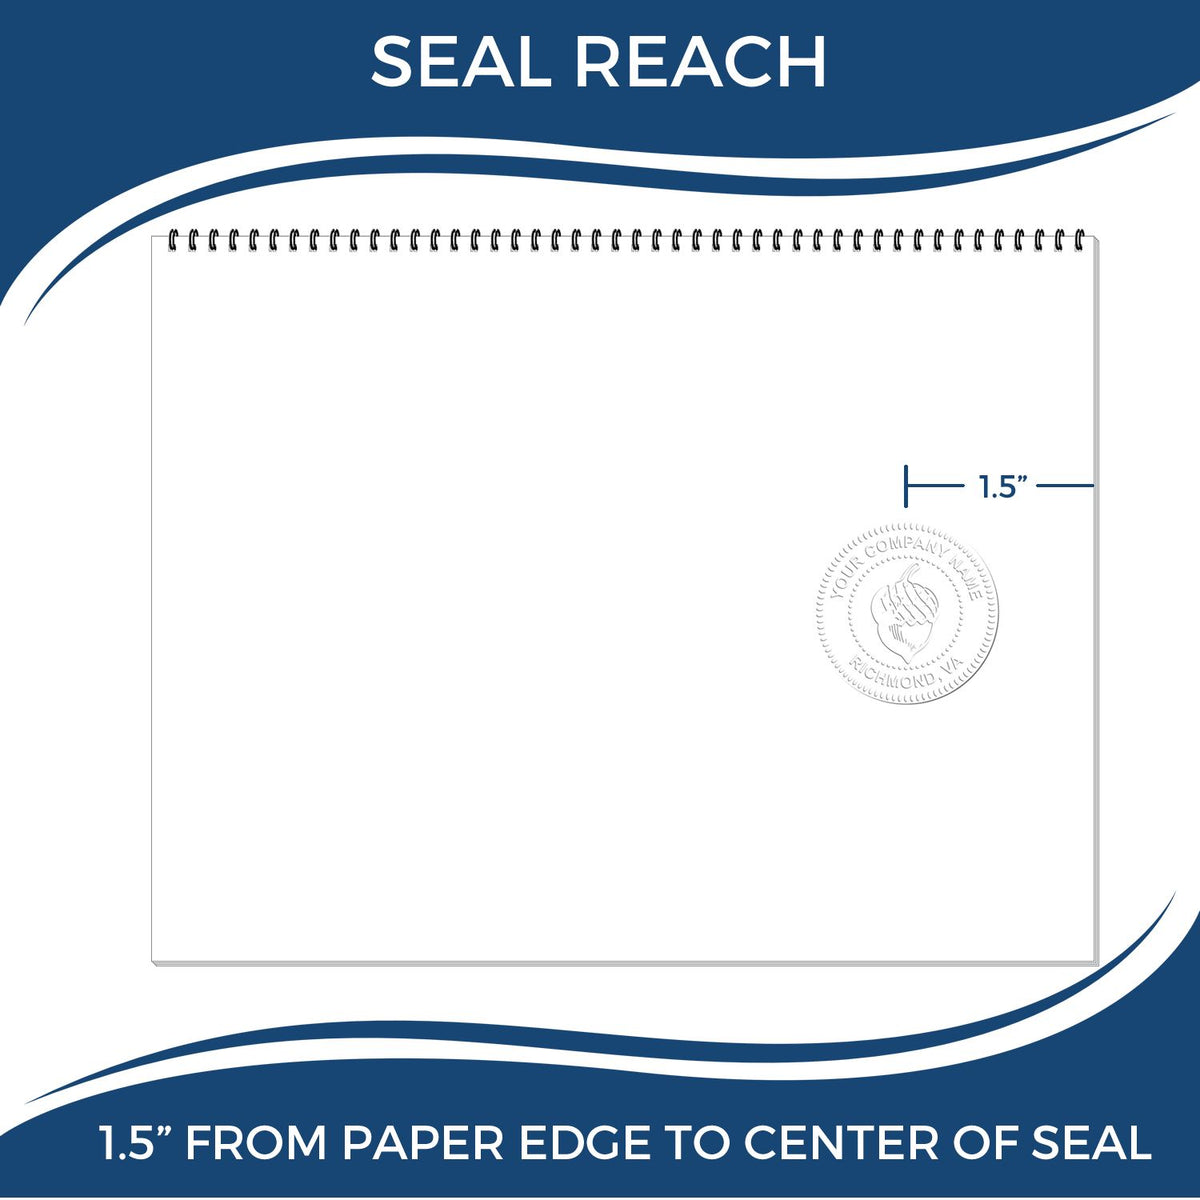 An infographic showing the seal reach which is represented by a ruler and a miniature seal image of the Hybrid Pennsylvania Land Surveyor Seal